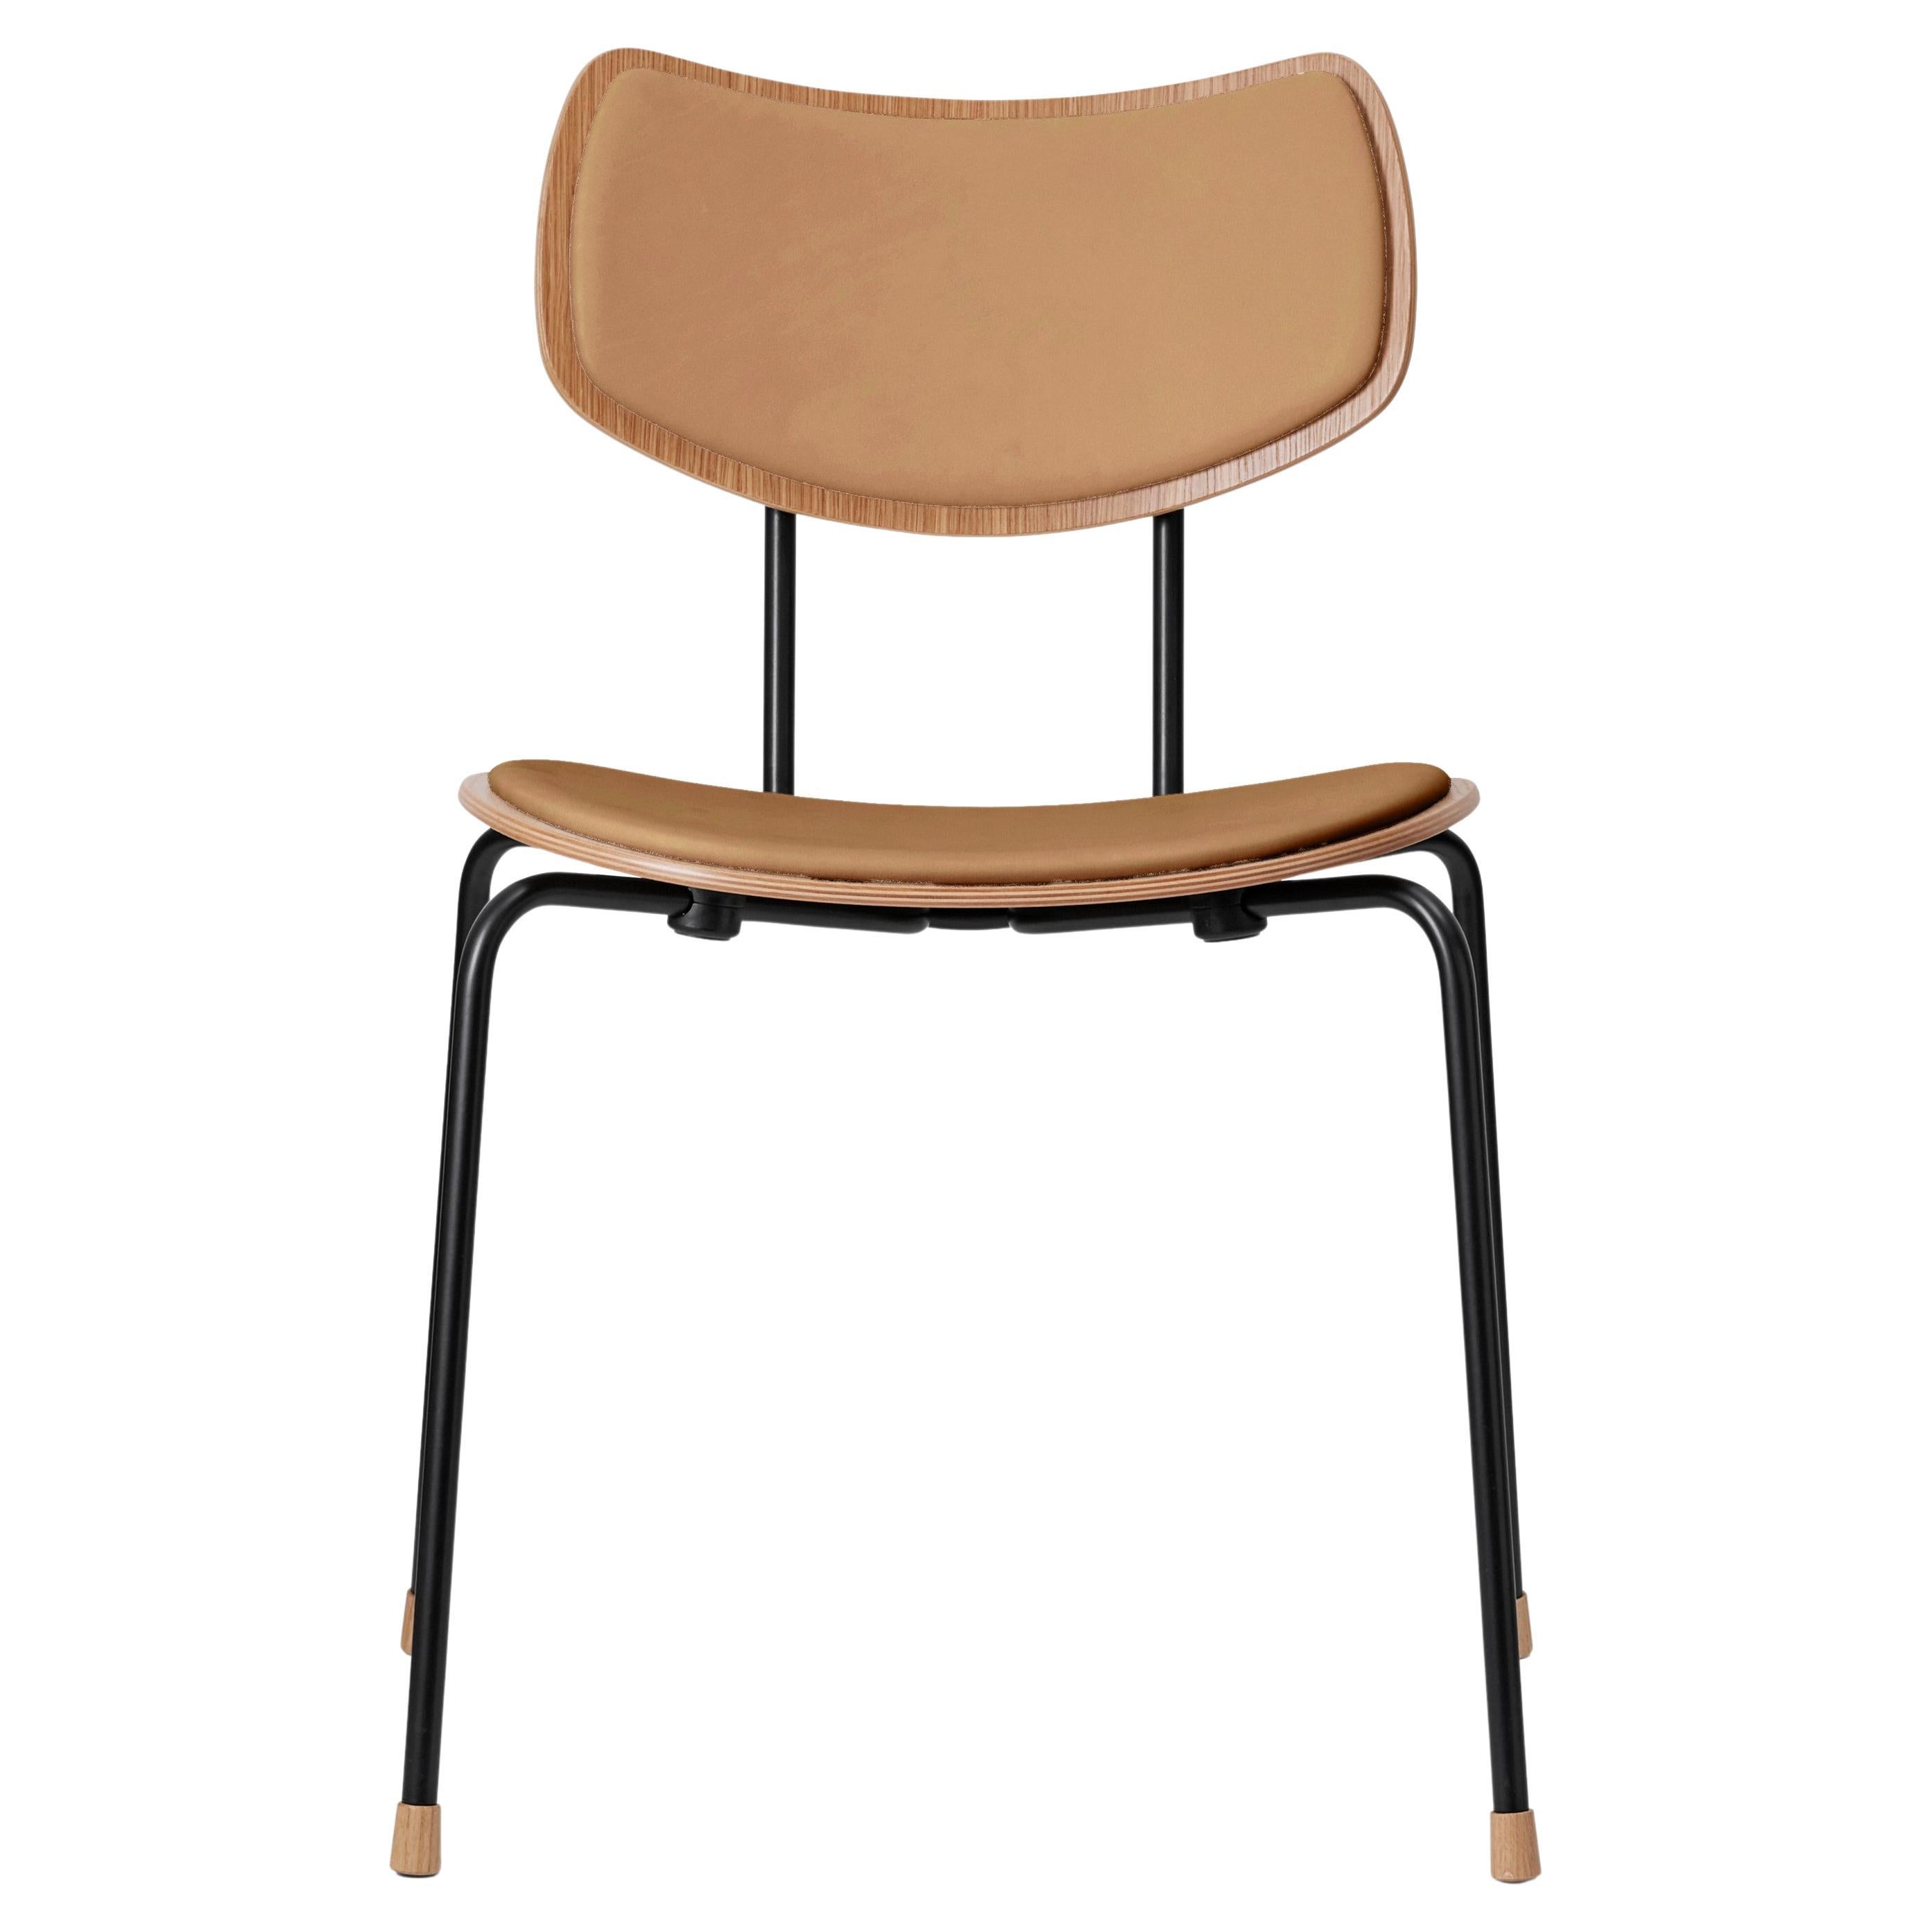 Carl Hansen Vega Series Chair in Edelman's Poem Leather by Ilse Crawford For Sale